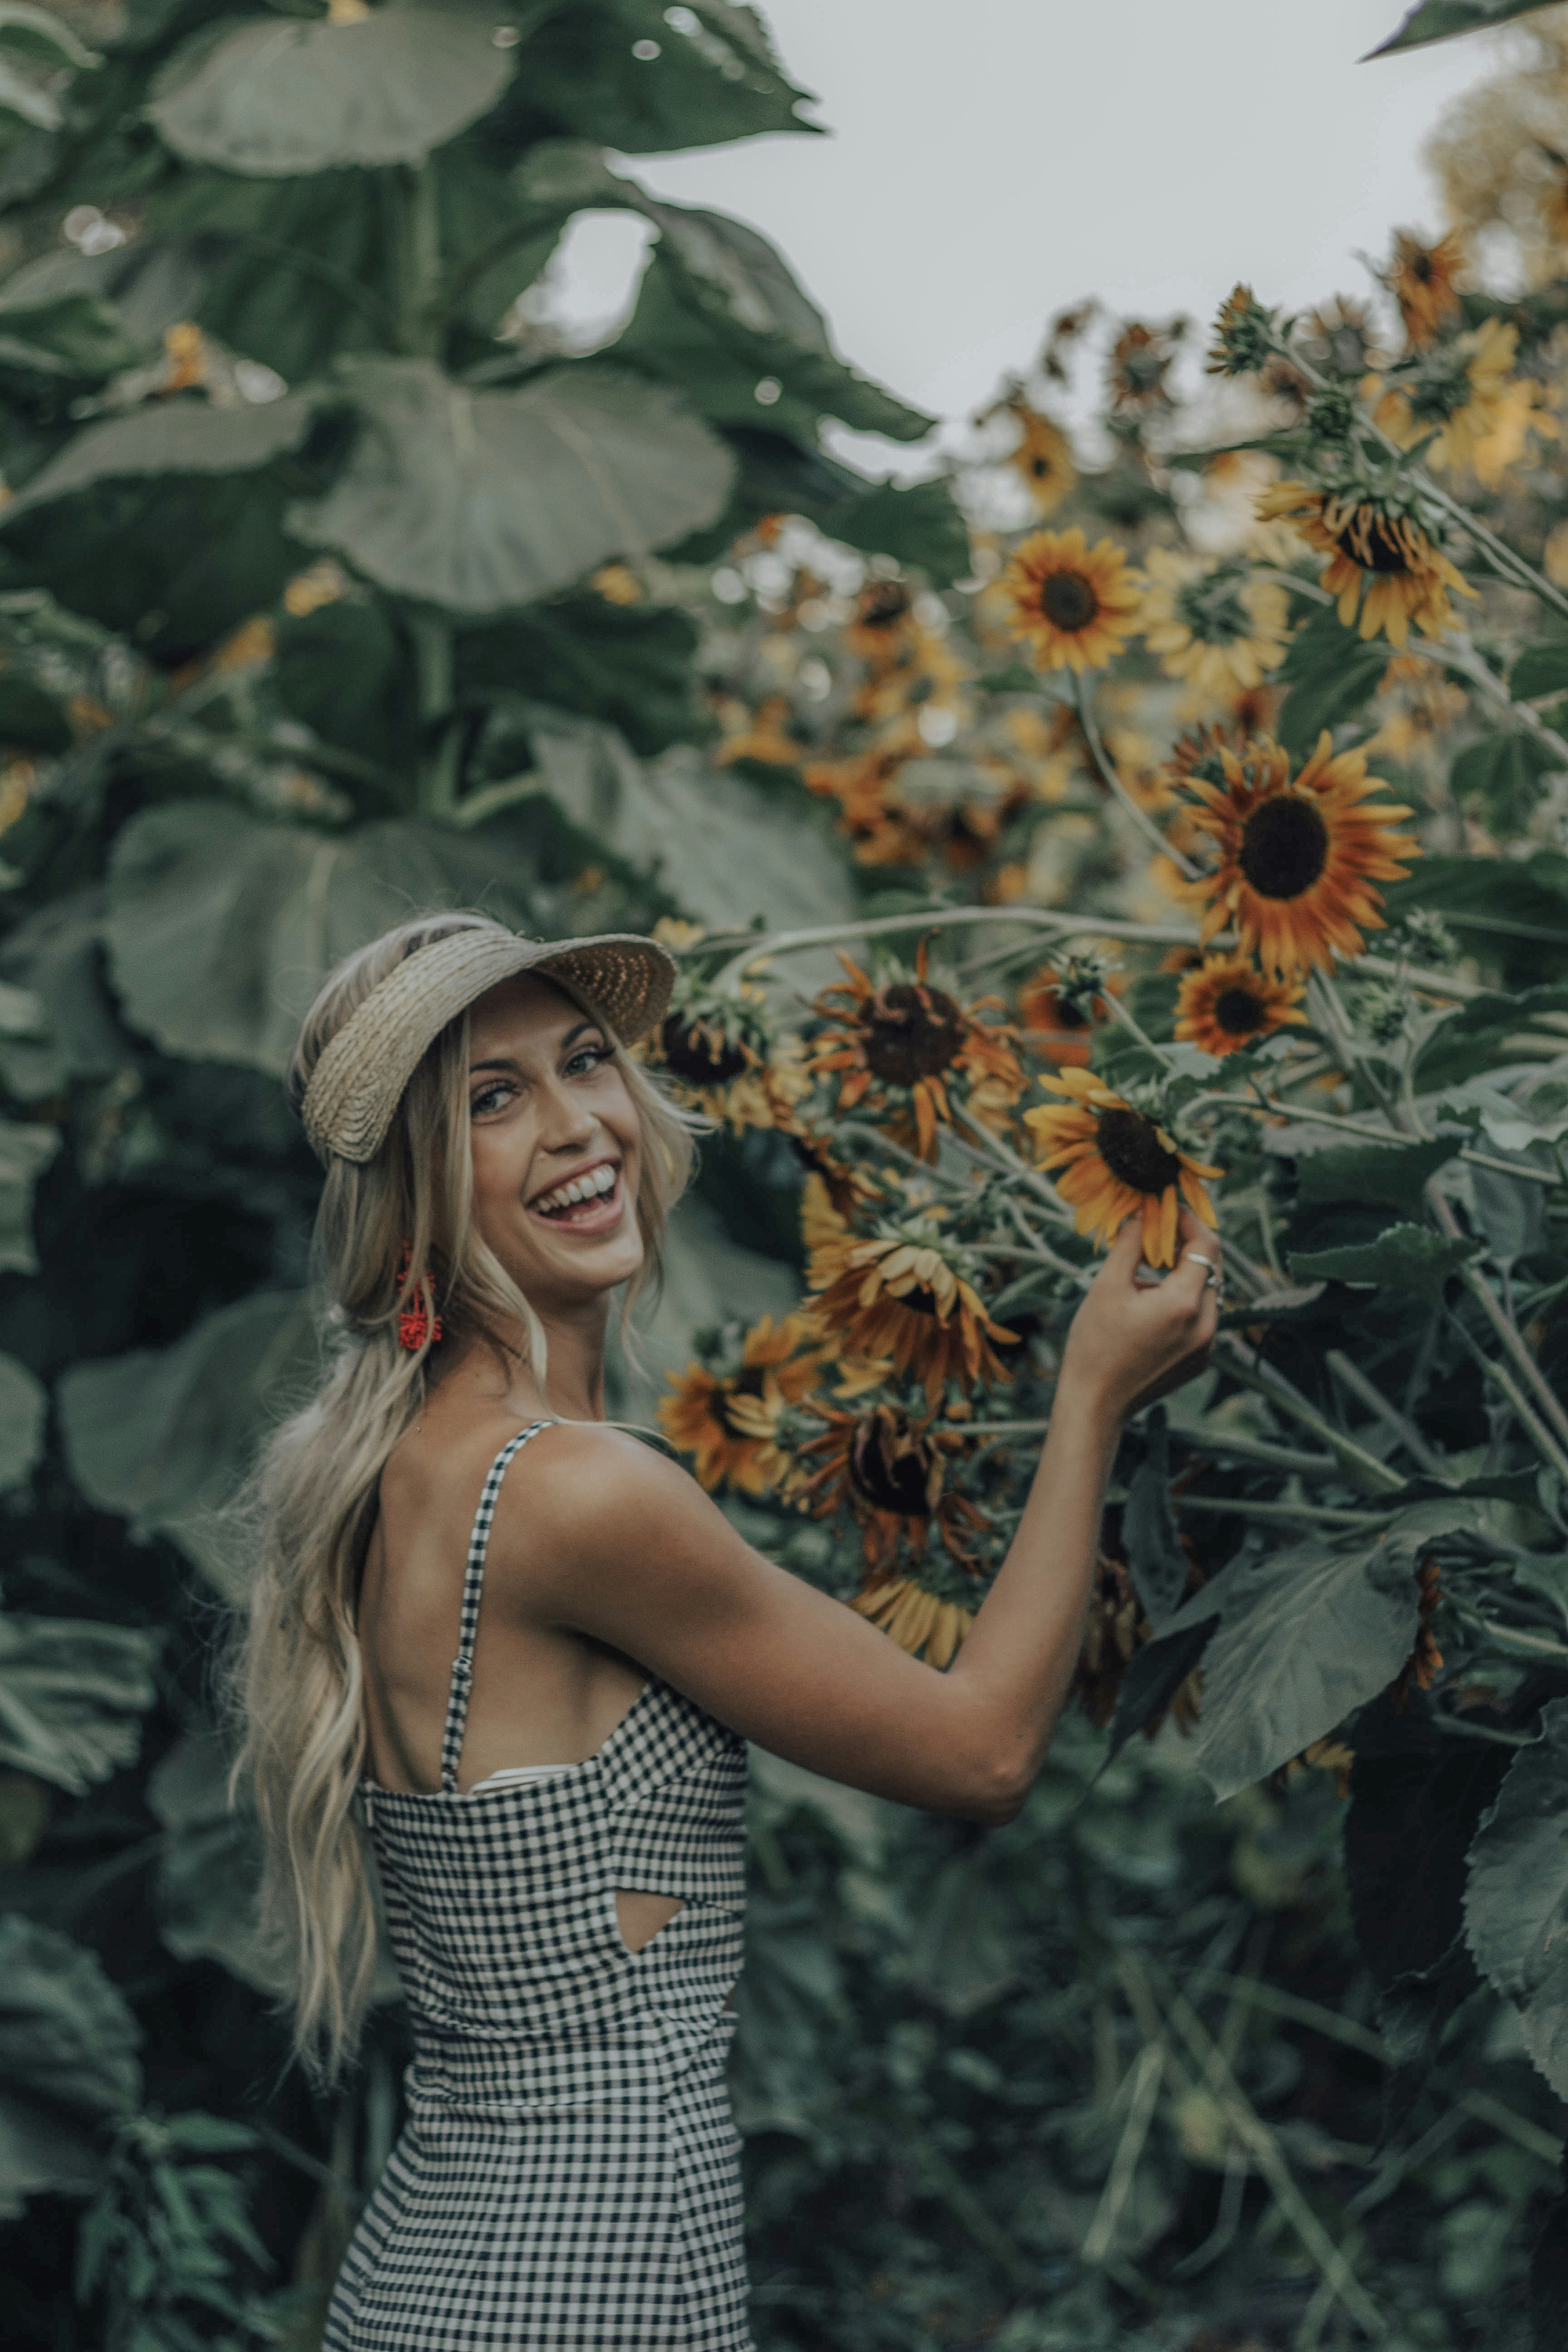 great photo recipe,how to photograph stop and smell the (sunflowers); one unknown celebrity smiling while holding sunflower